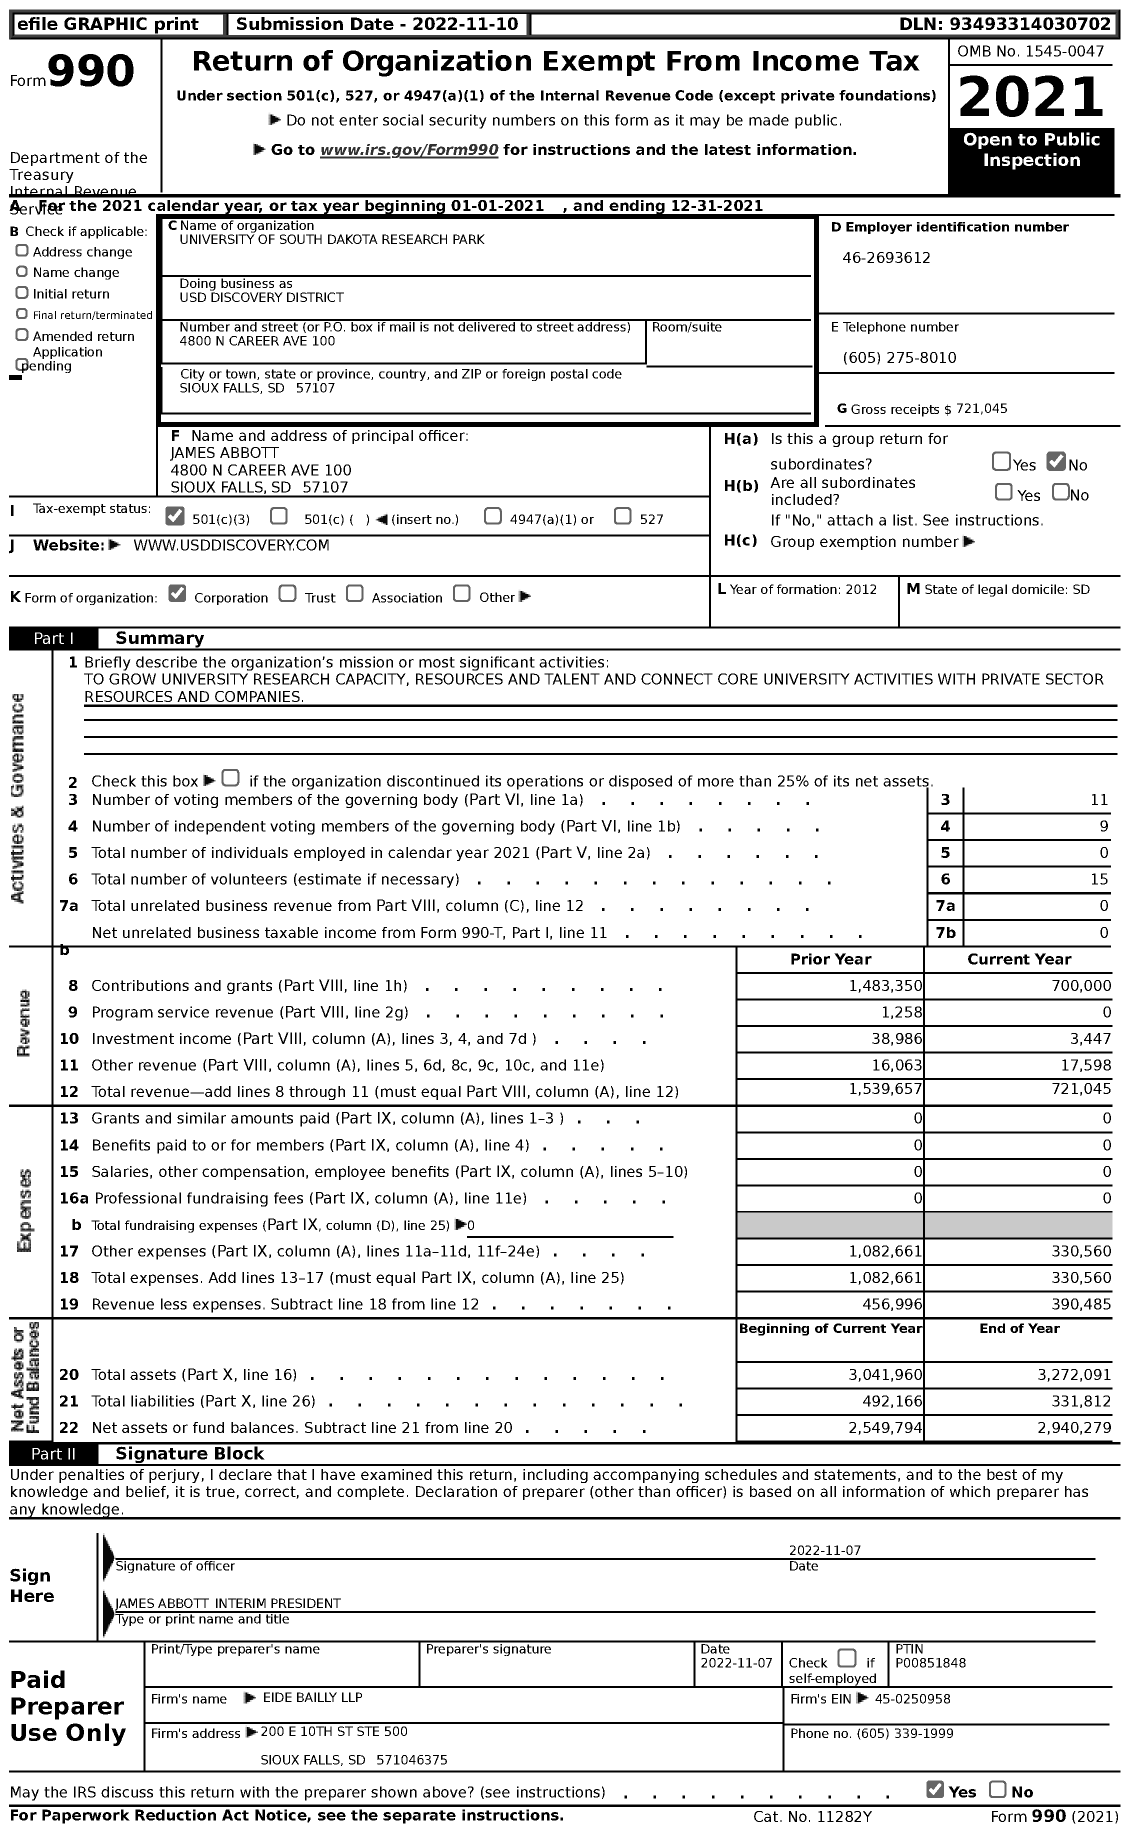 Image of first page of 2021 Form 990 for Usd Discovery District